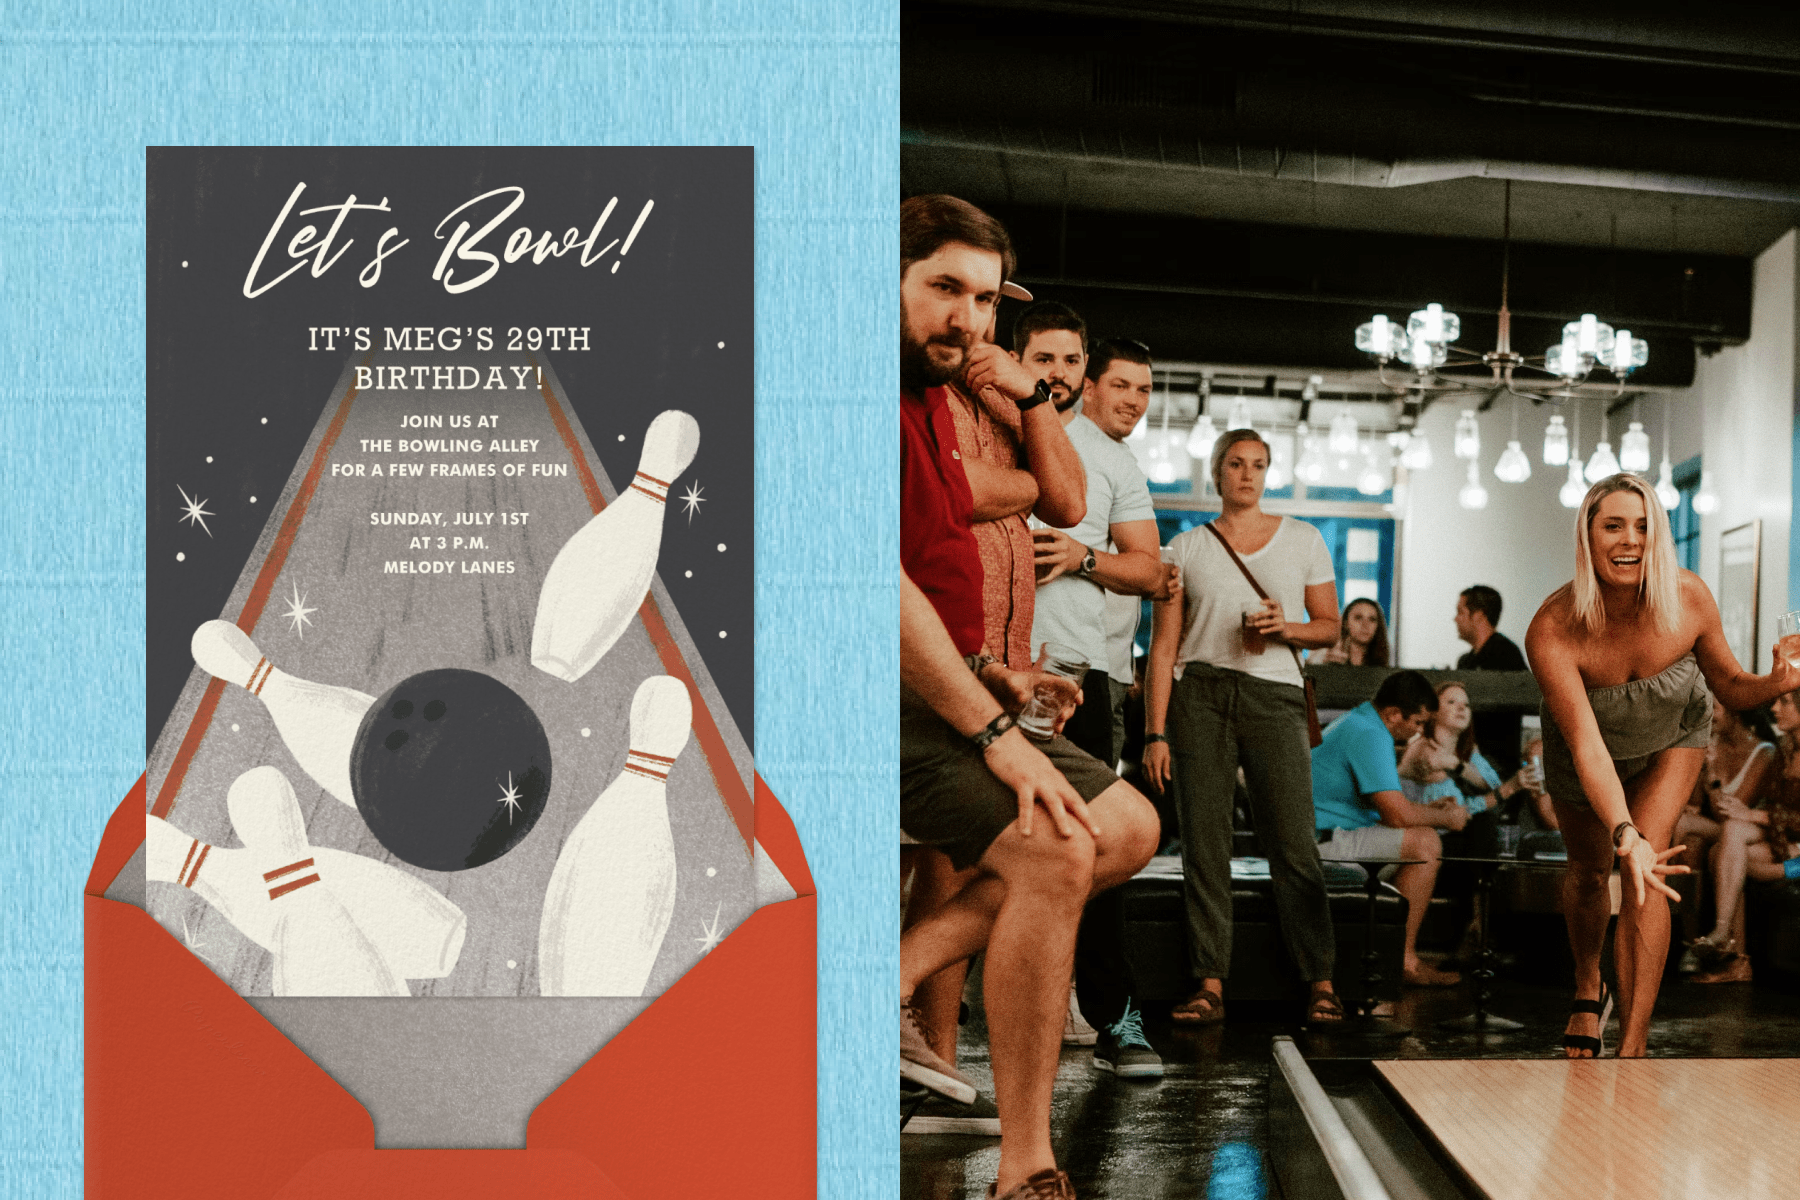 An invitation reads LET’s BOWL! In script with an illustration of a bowling ball knocking down pins in a lane above a red envelope; several young adults holding drinks look on as a woman appears to bowl. 